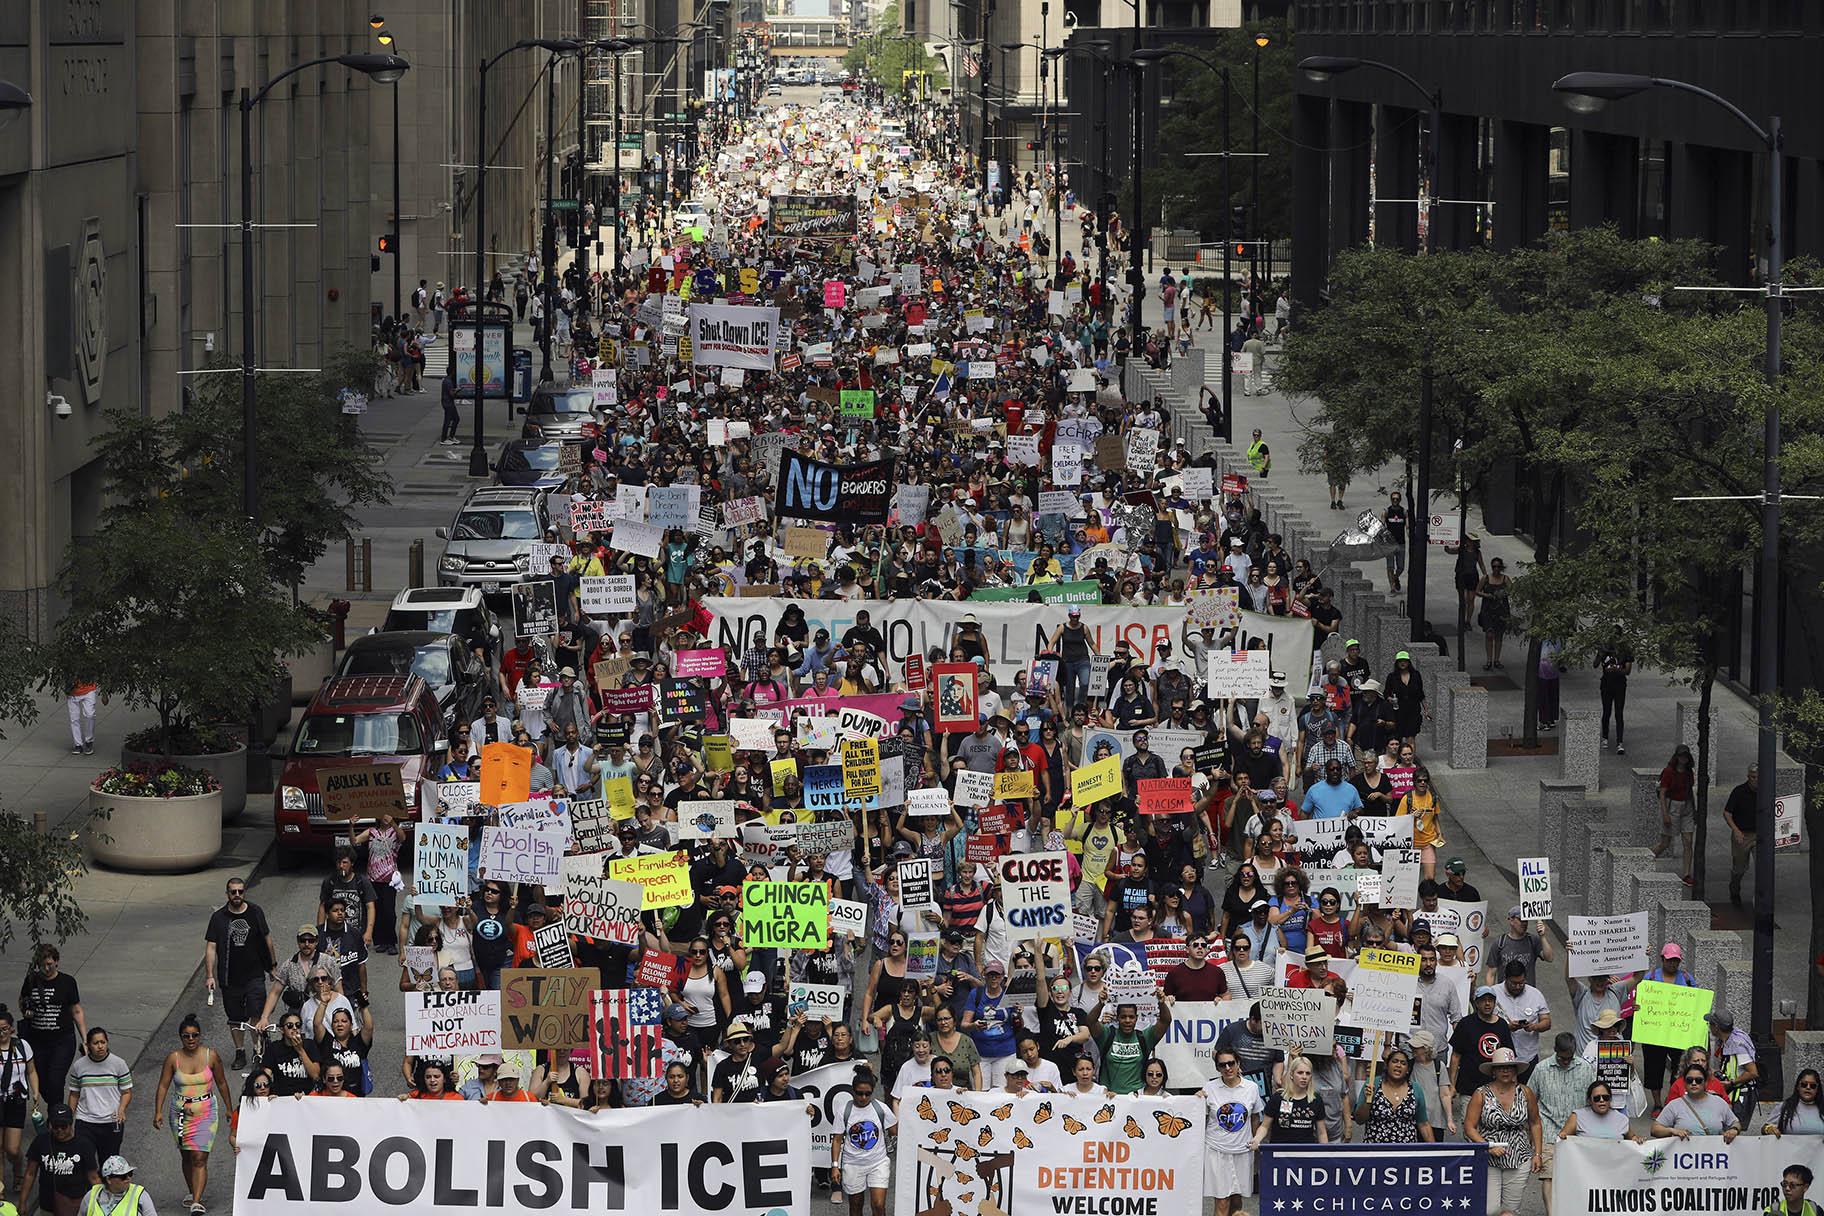 Thousands of people, including immigrants and their supporters, rally against President Donald Trump’s immigration policies as they march from Daley Plaza to the Chicago field office of Immigration and Customs Enforcement, Saturday, July 13, 2019, in Chicago. (Abel Uribe / Chicago Tribune via AP)